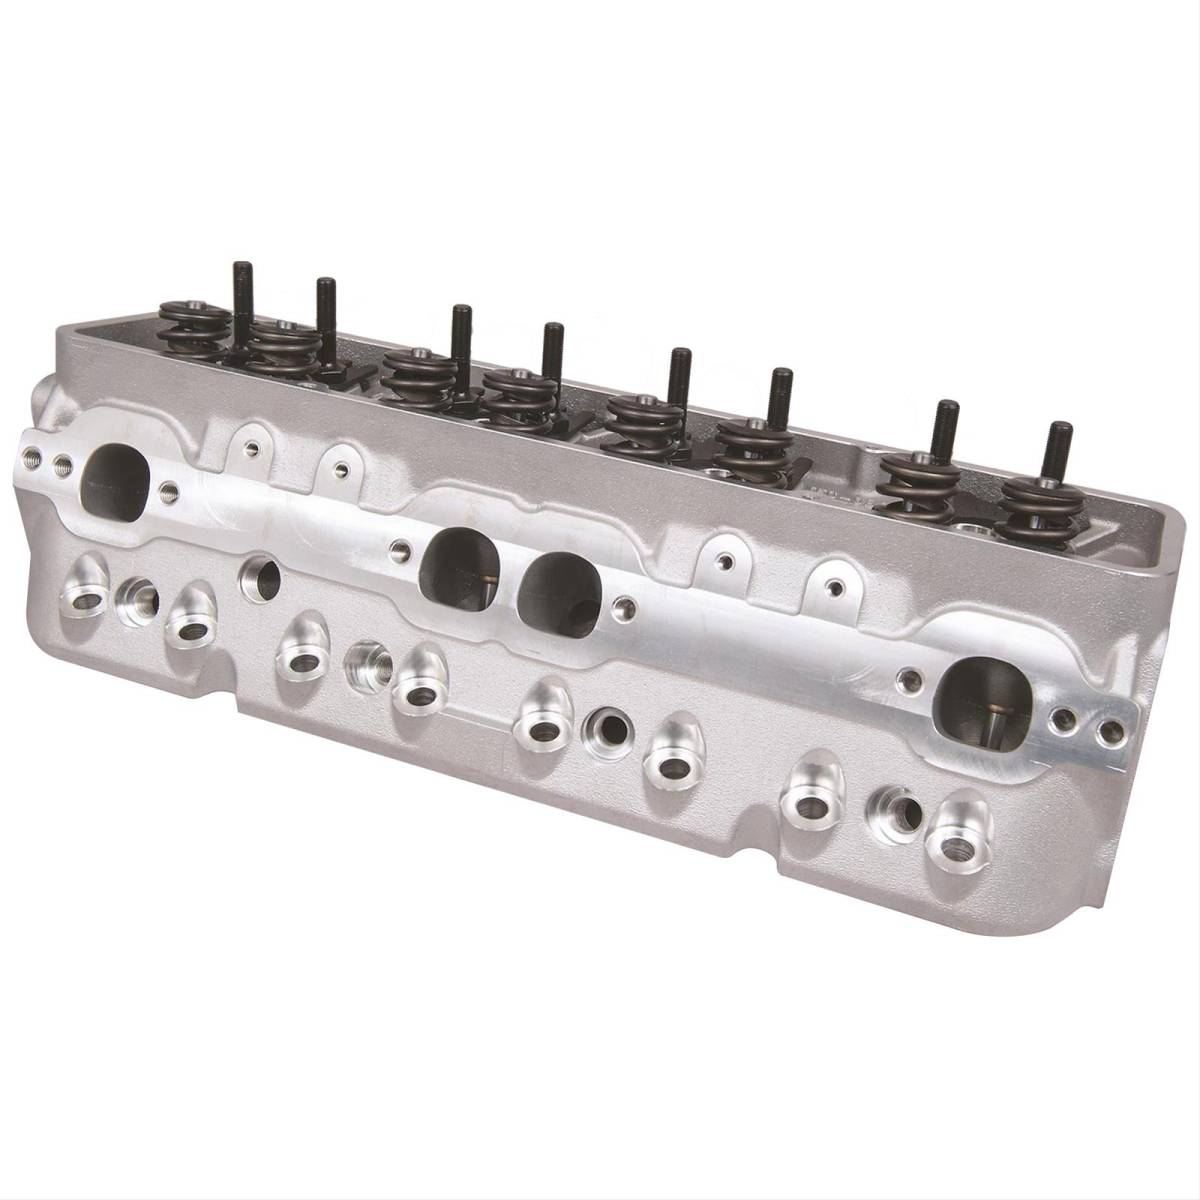 Trickflow - Trickflow Super 23 Cylinder Heads, SB Chevy, 195cc Intake, 64cc Chambers, 1.470" Springs, Center Bolt - Image 1